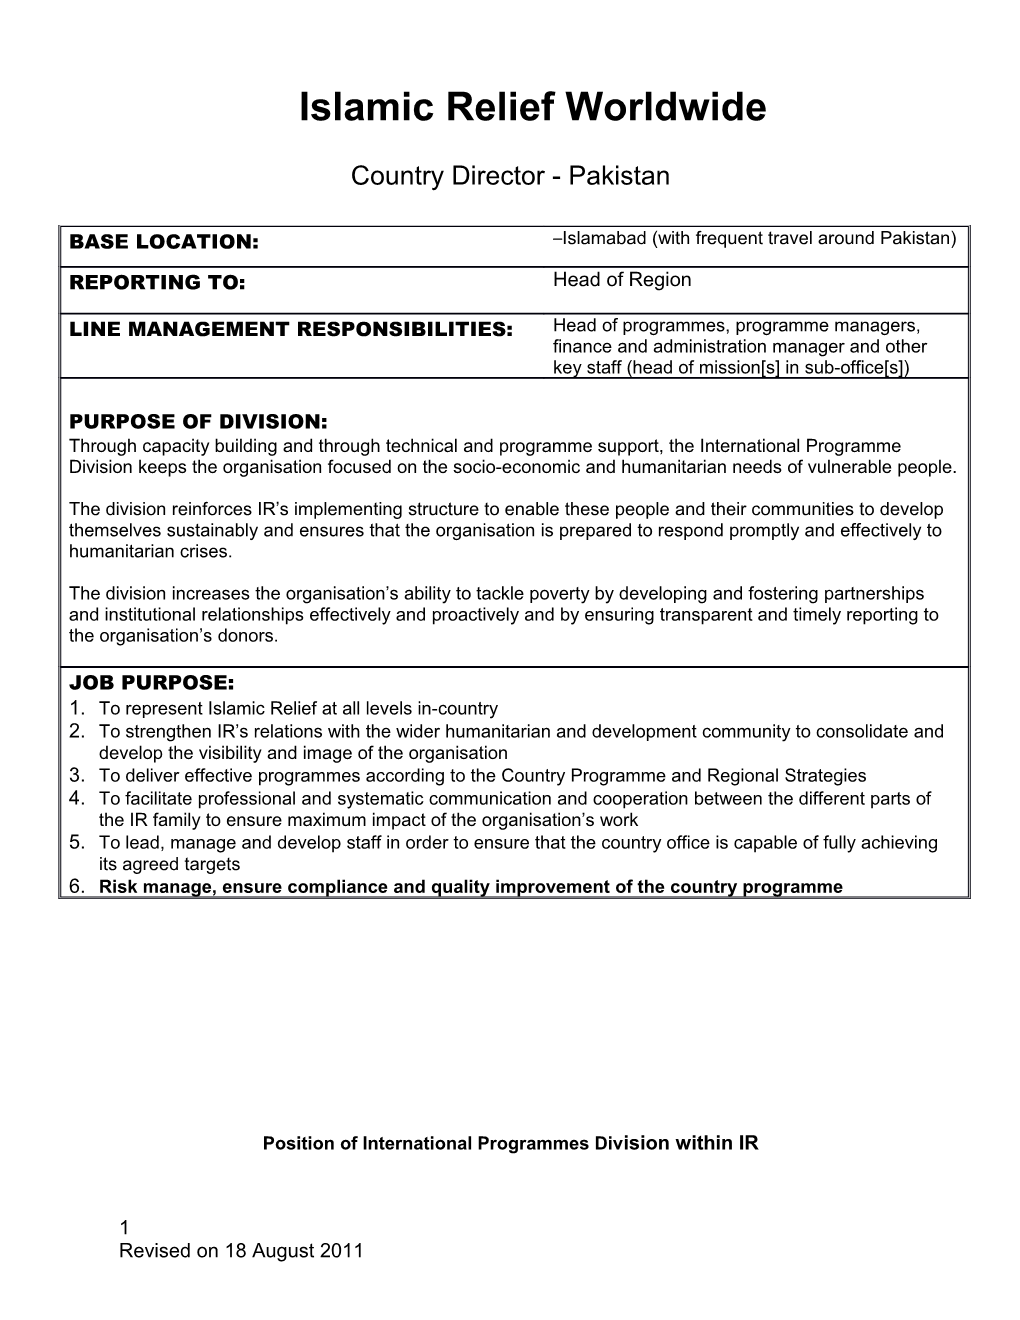 Position of International Programmes Division Within IR